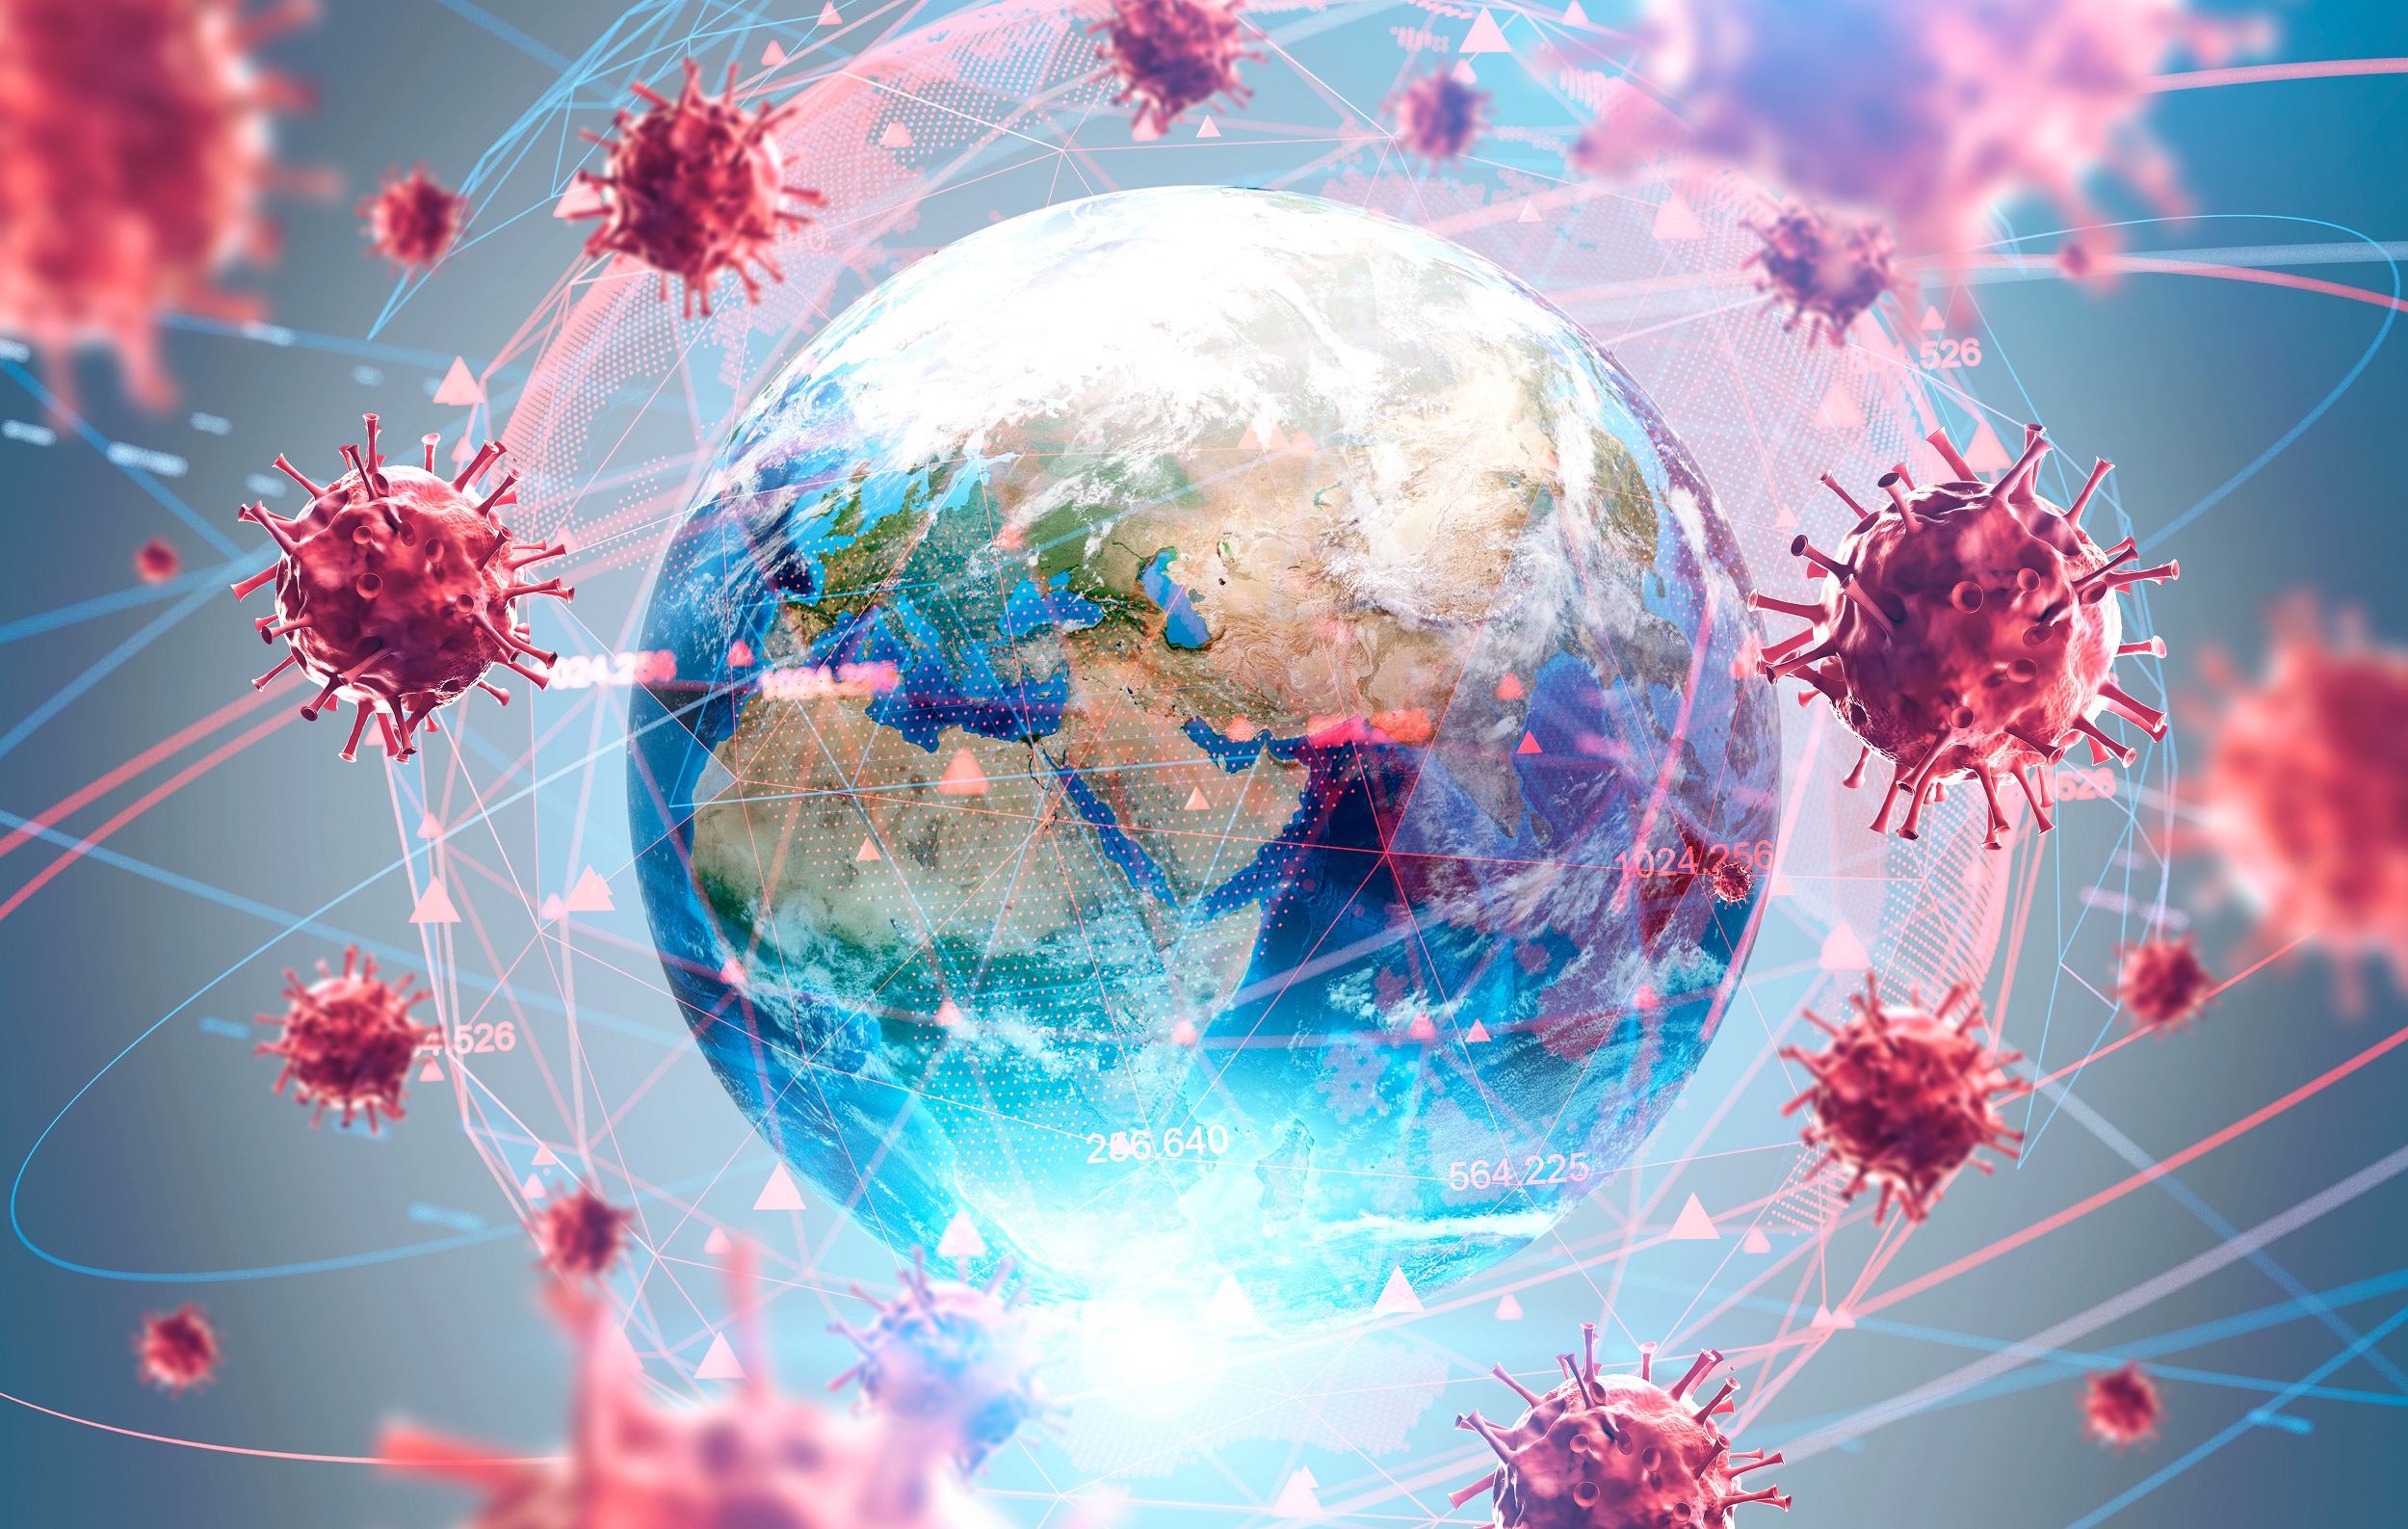 Depiction of the COVID-19 virus circling the Earth.